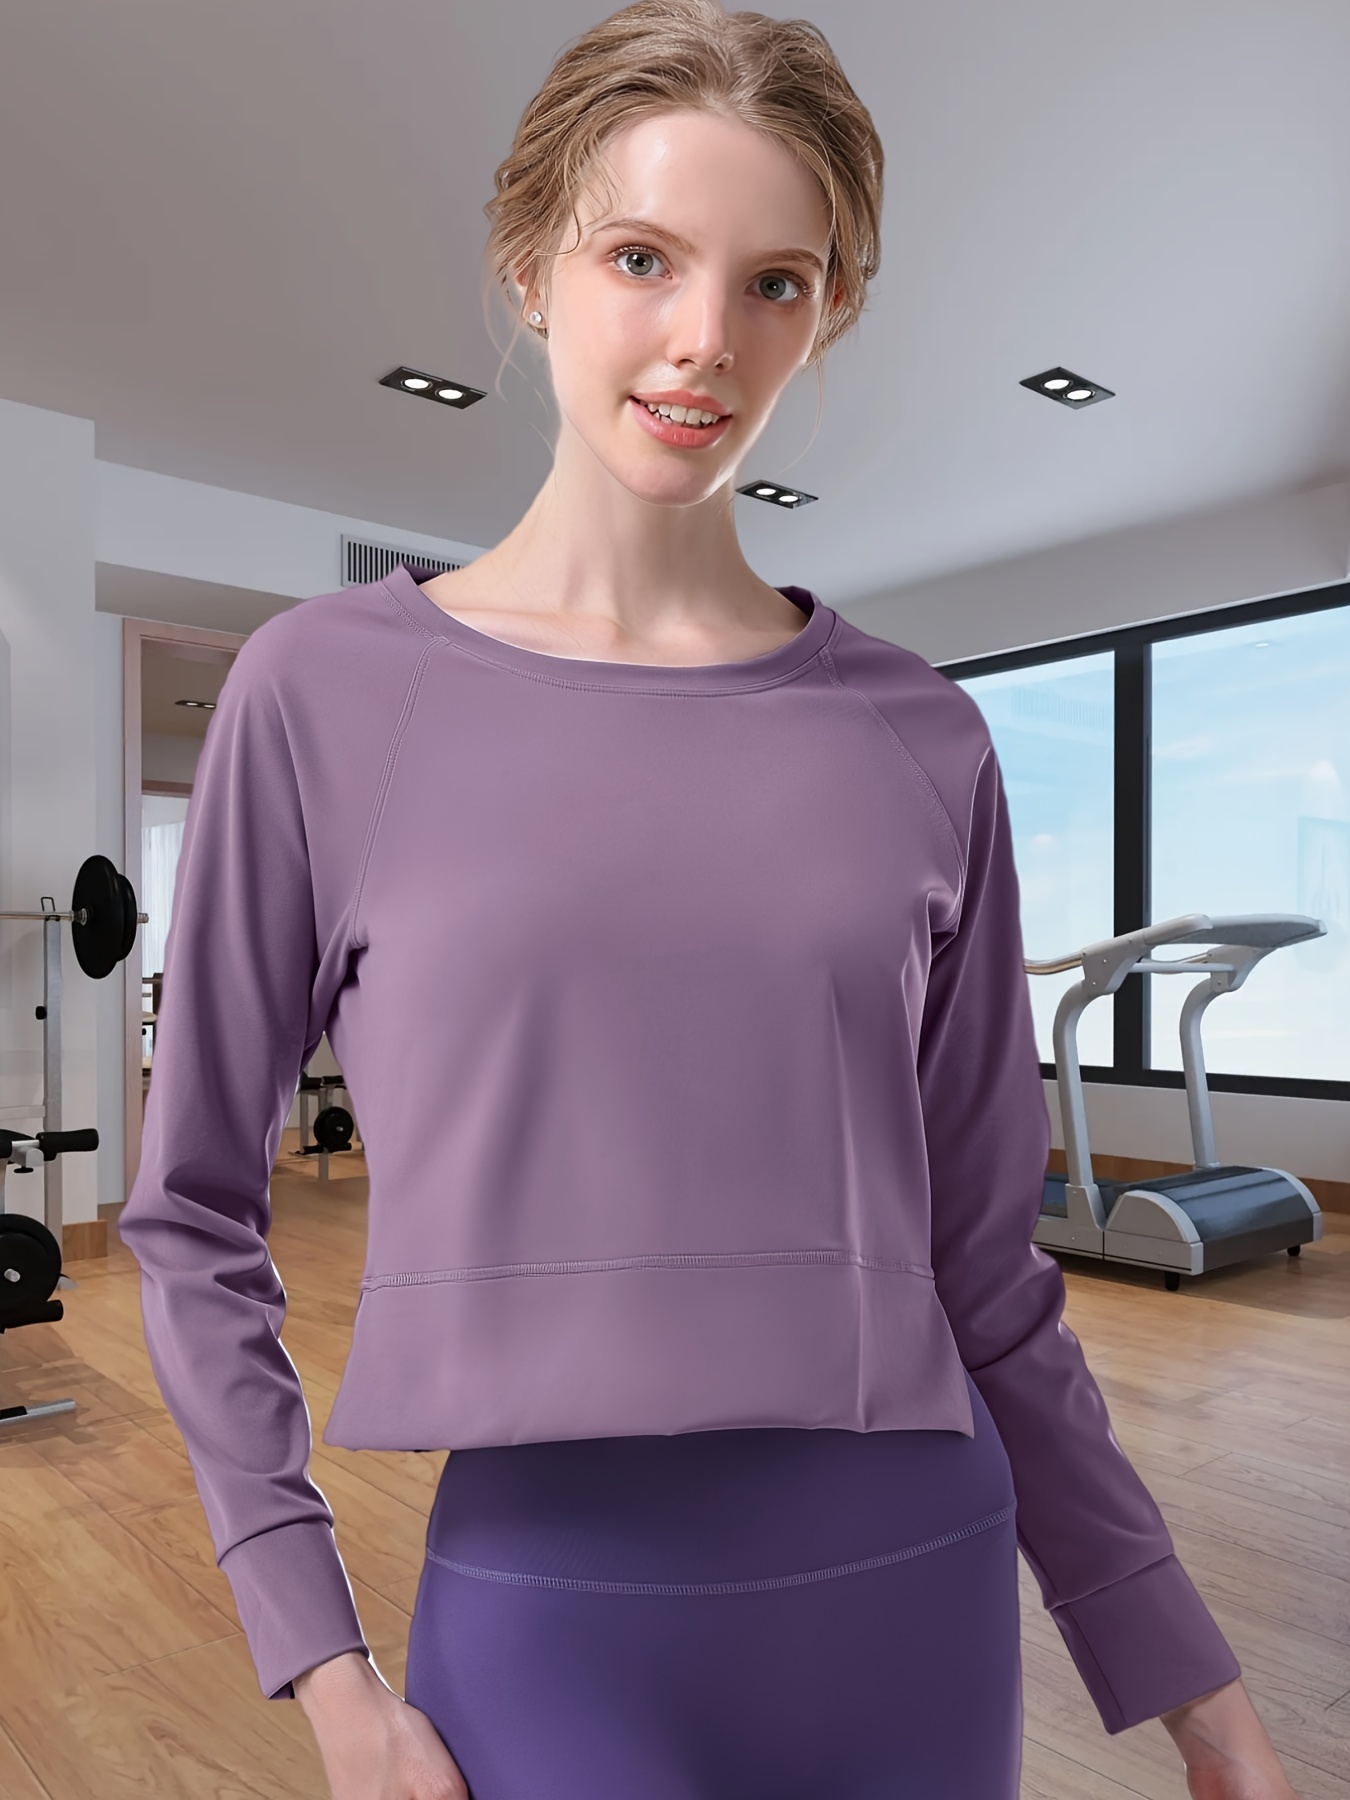 Women's Long Sleeve Workout Shirts - Loose Fit